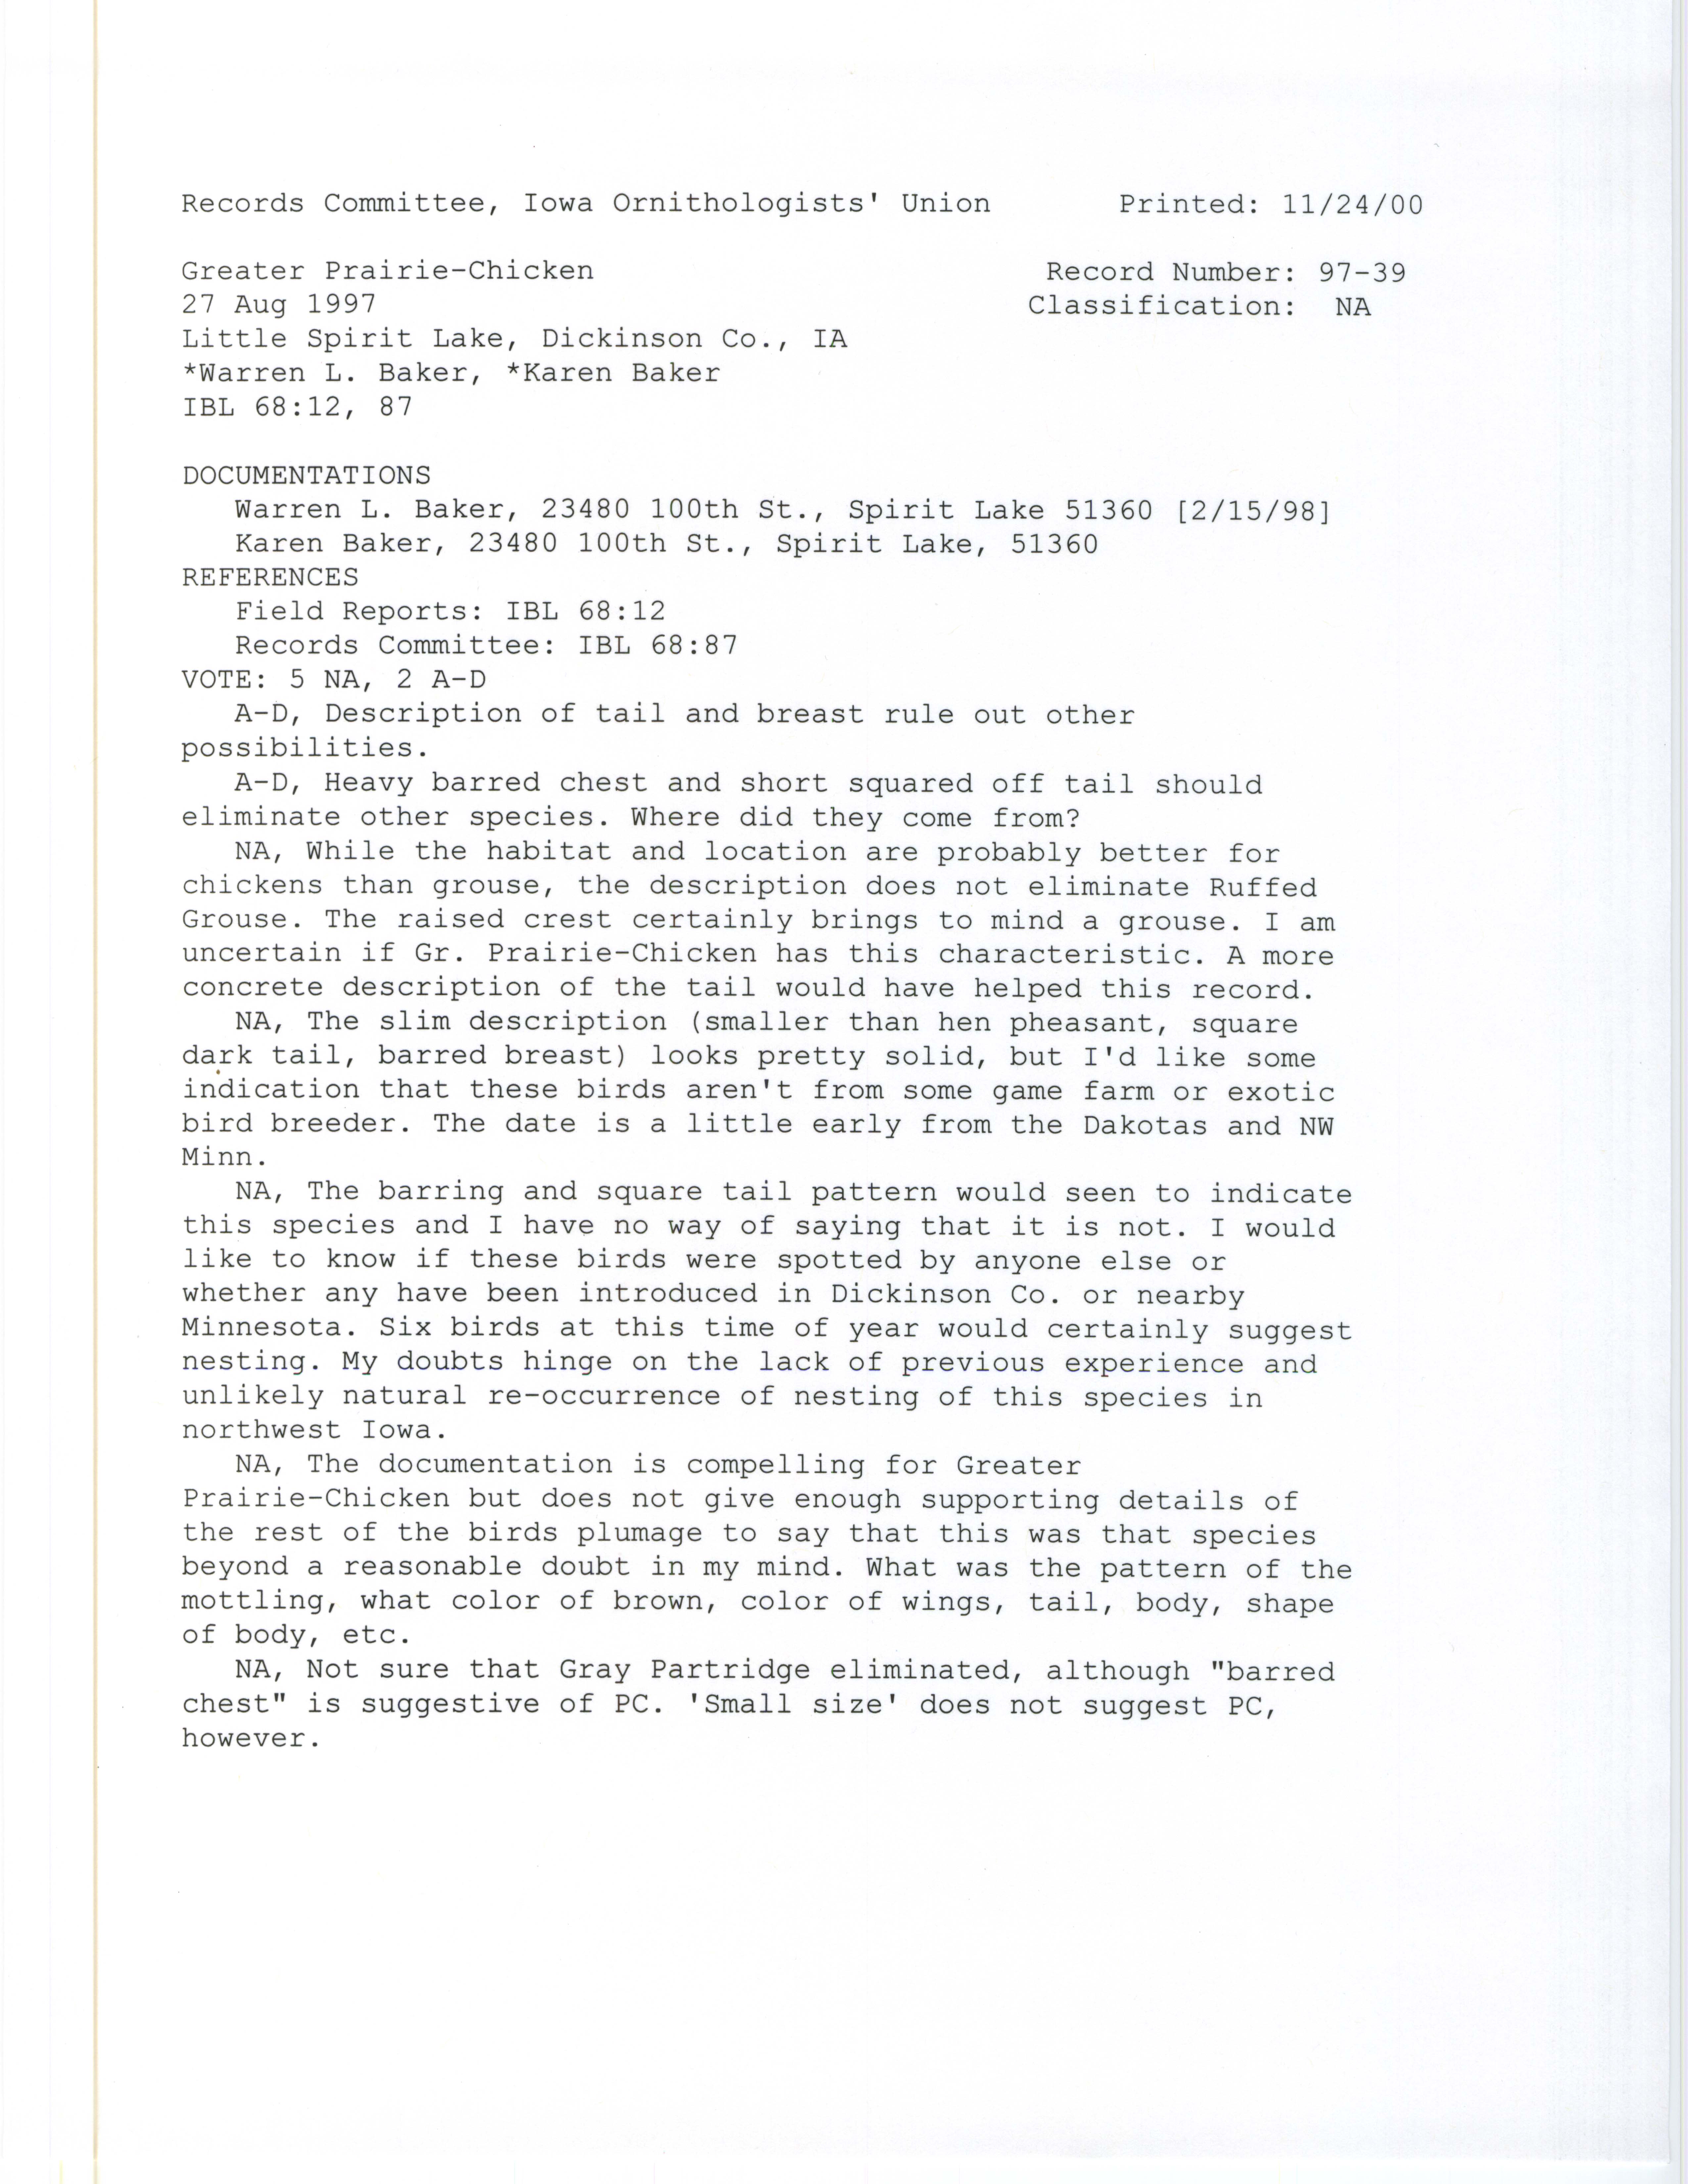 Records Committee review for rare bird sighting of Greater Prairie-Chicken at Little Spirit Lake, 1997